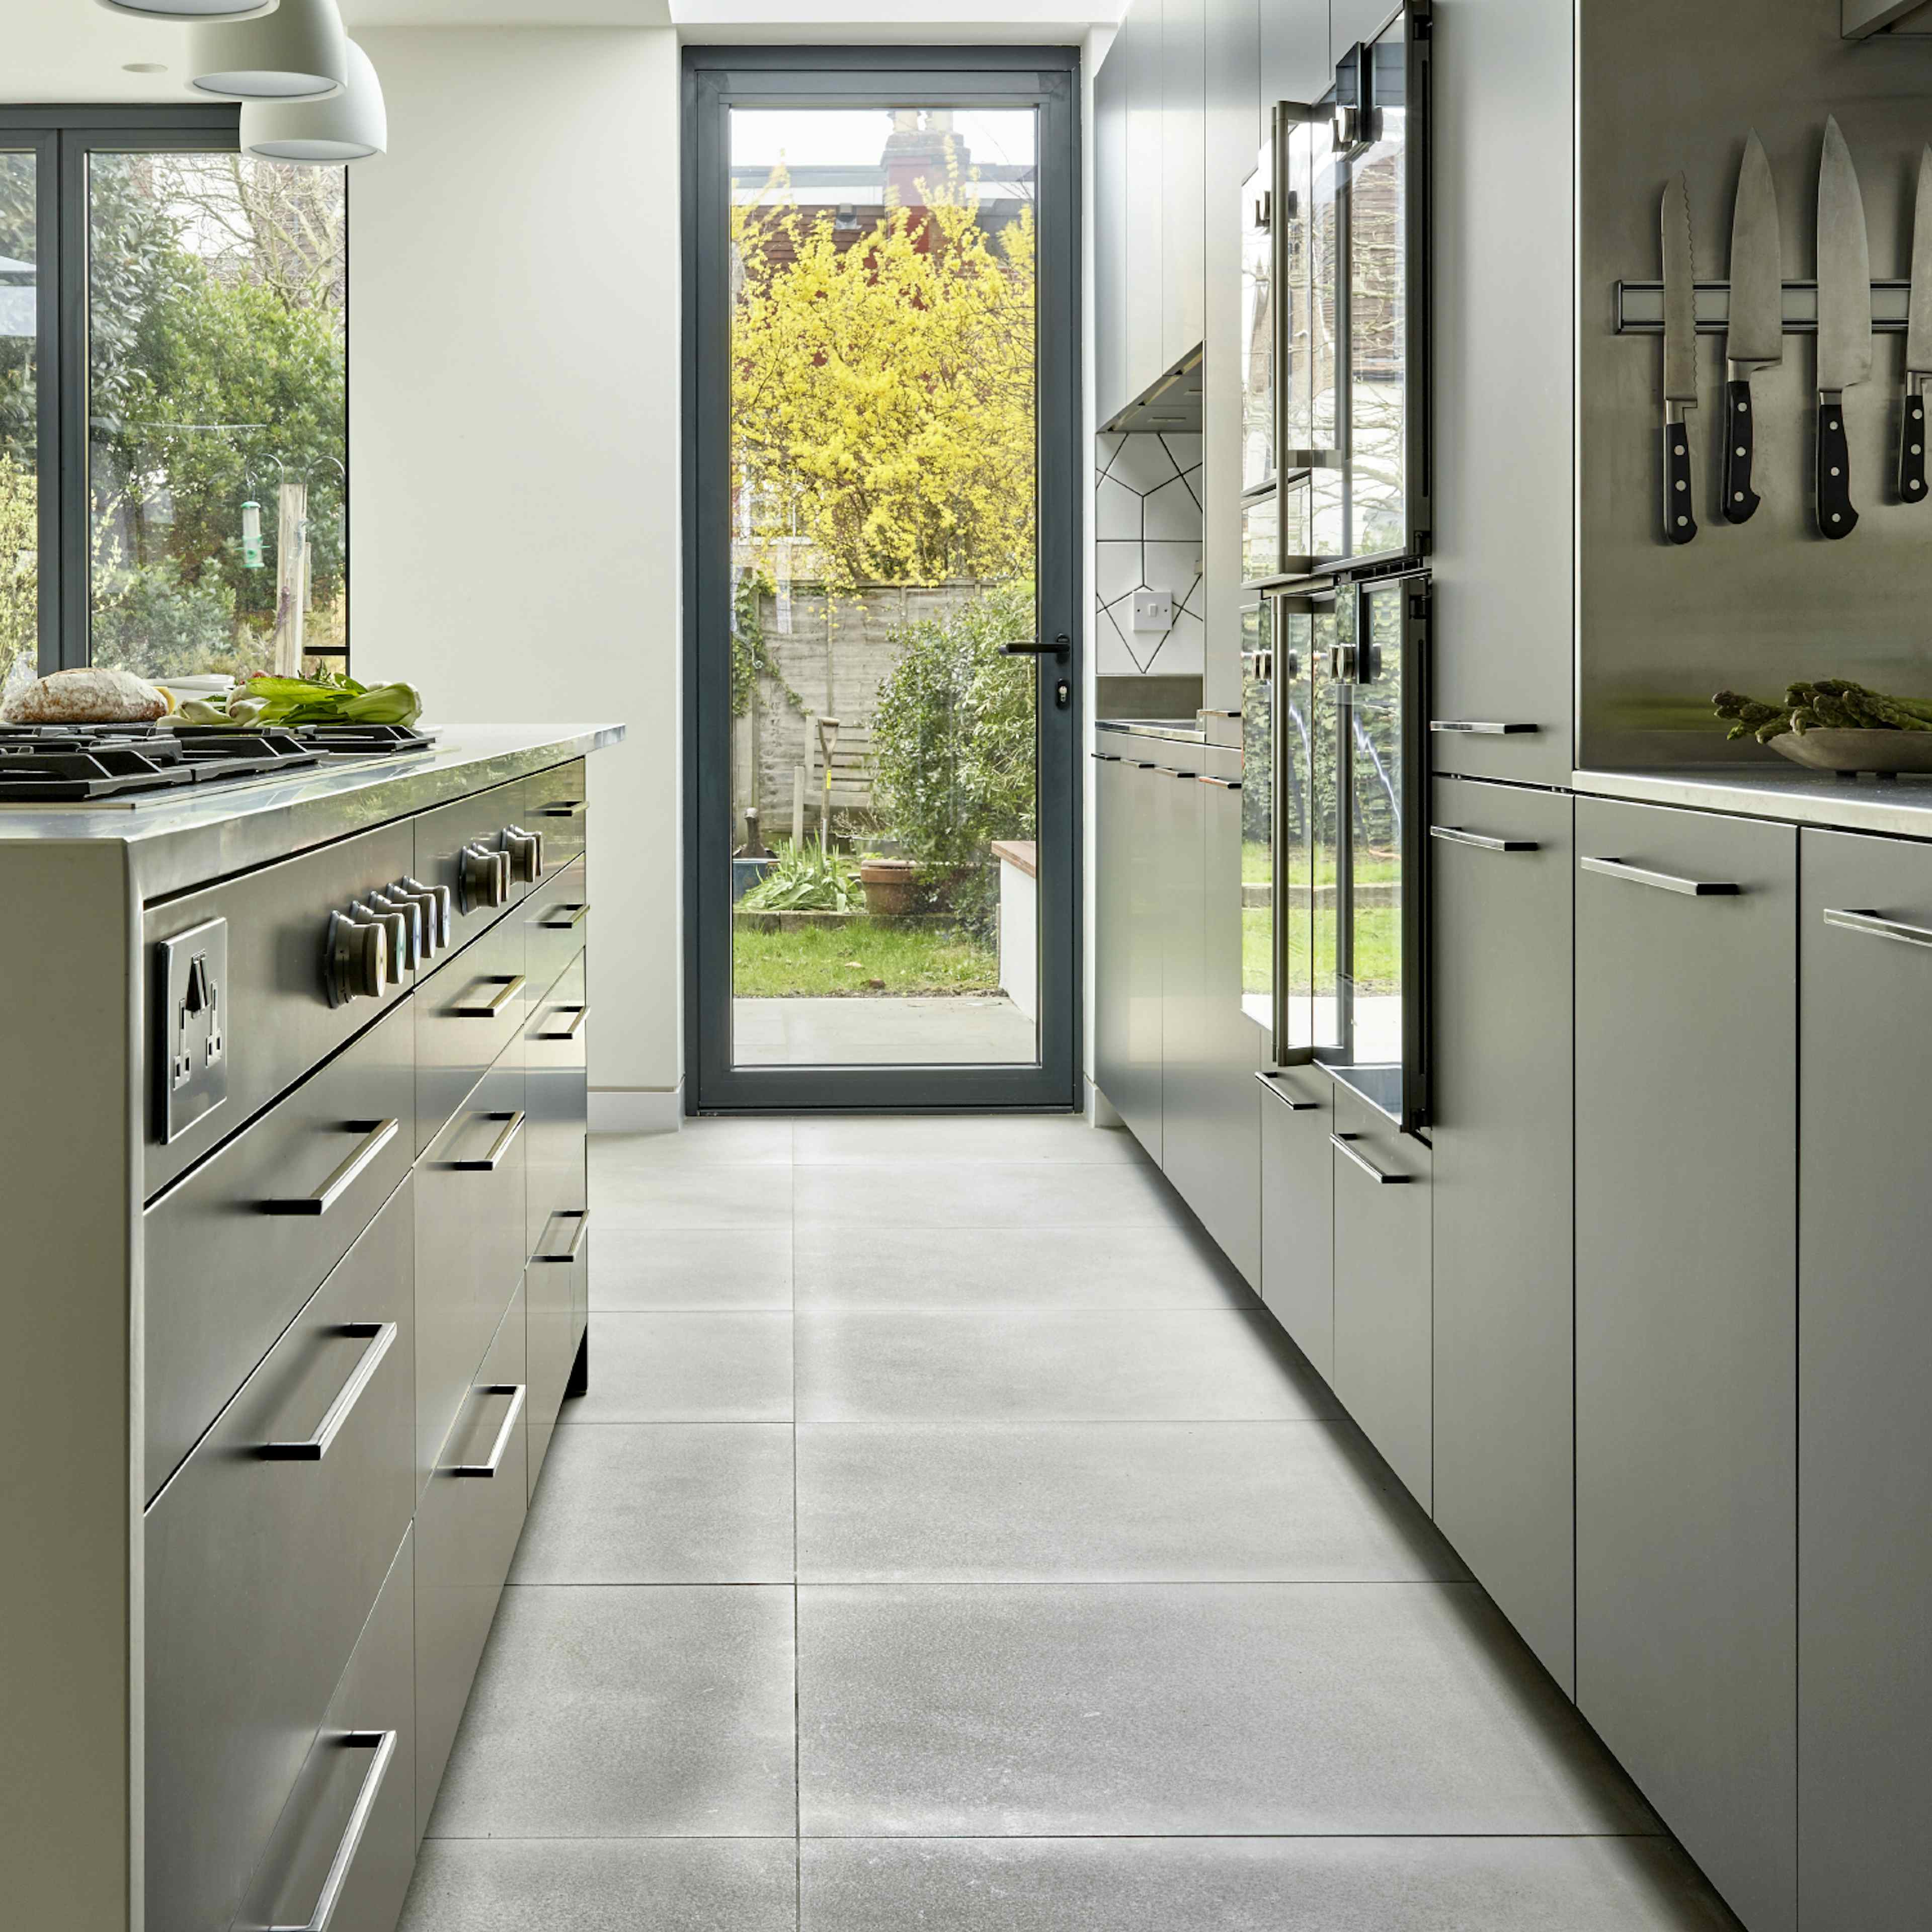 Beautiful home kitchen and cookery school - Kitchen and Cookery School image 3